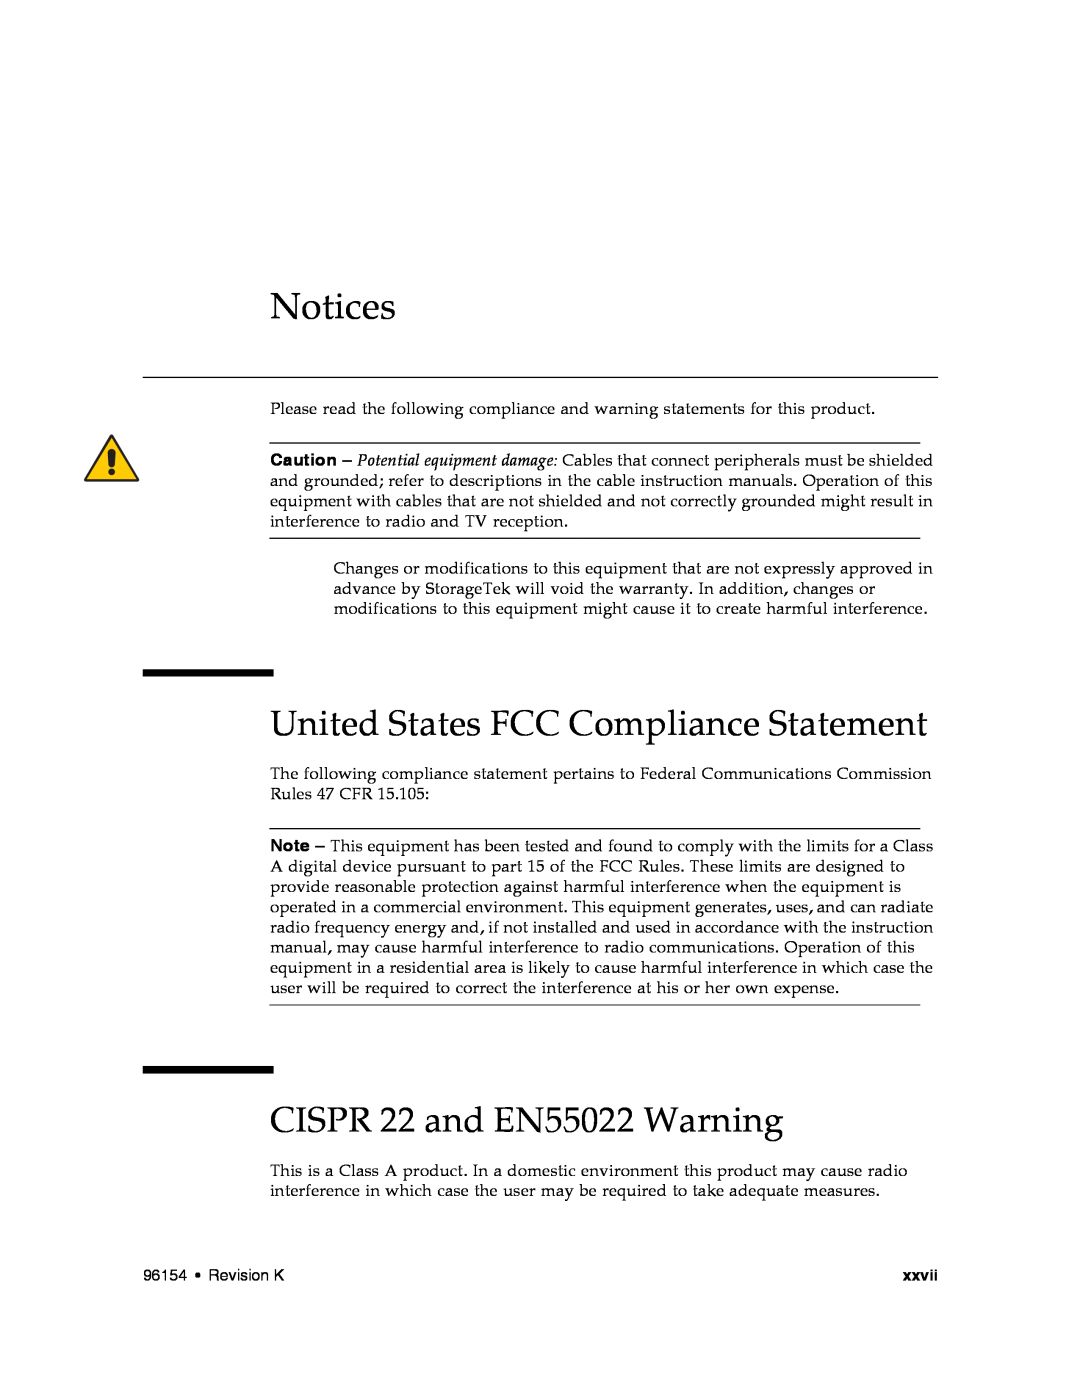 Sun Microsystems SL8500 manual Notices, United States FCC Compliance Statement, CISPR 22 and EN55022 Warning 